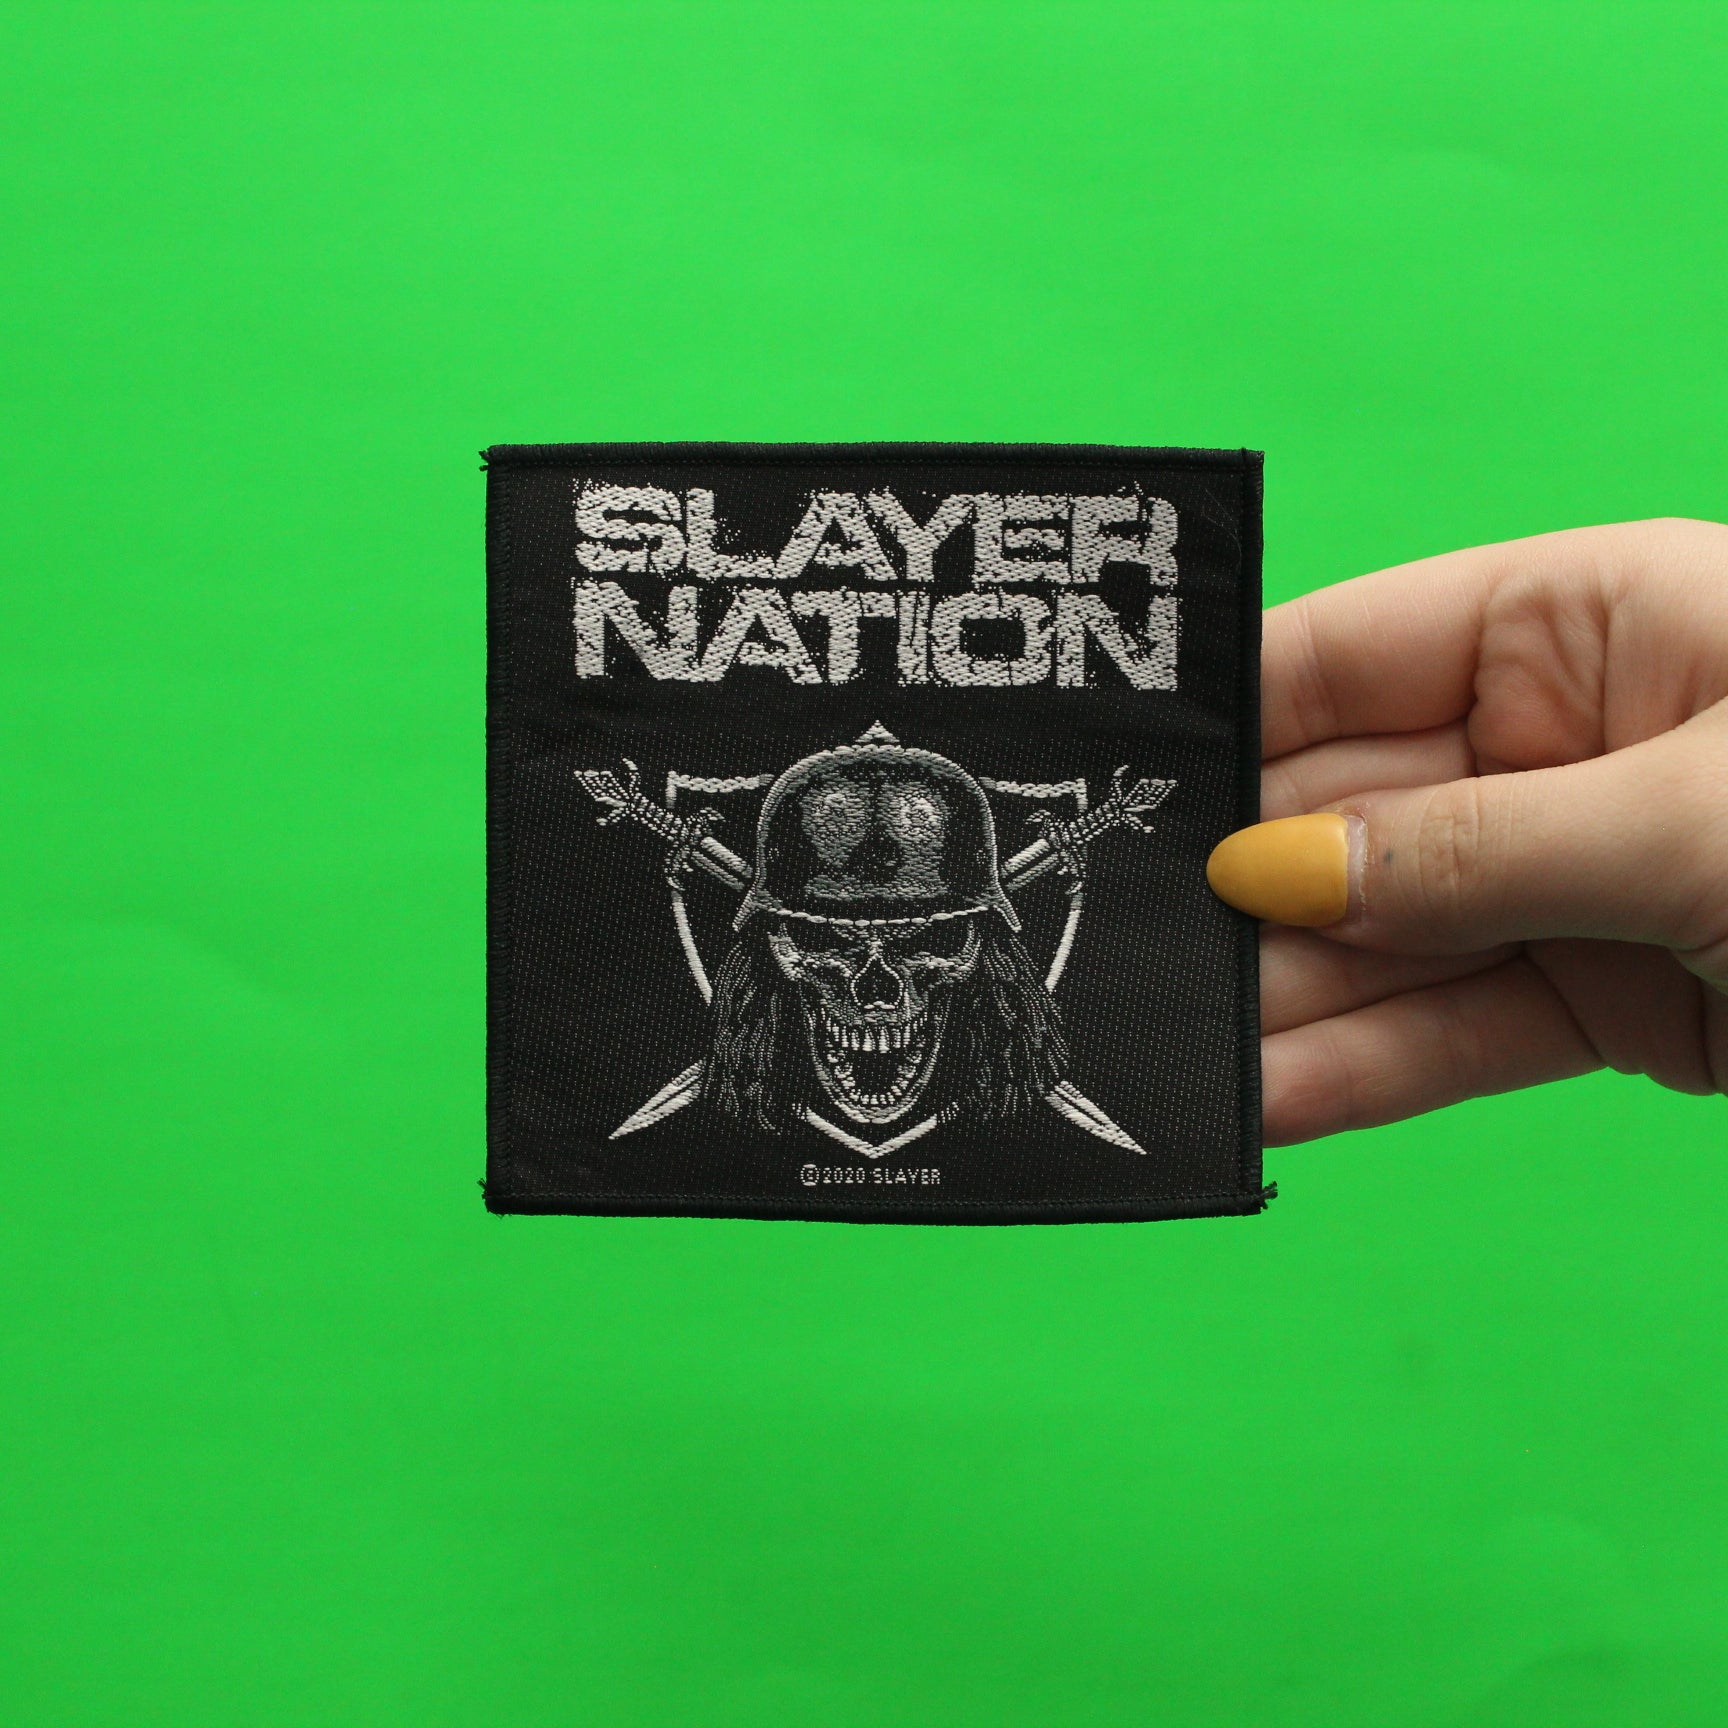 2020 Slayer Nation Woven Sew On Patch 